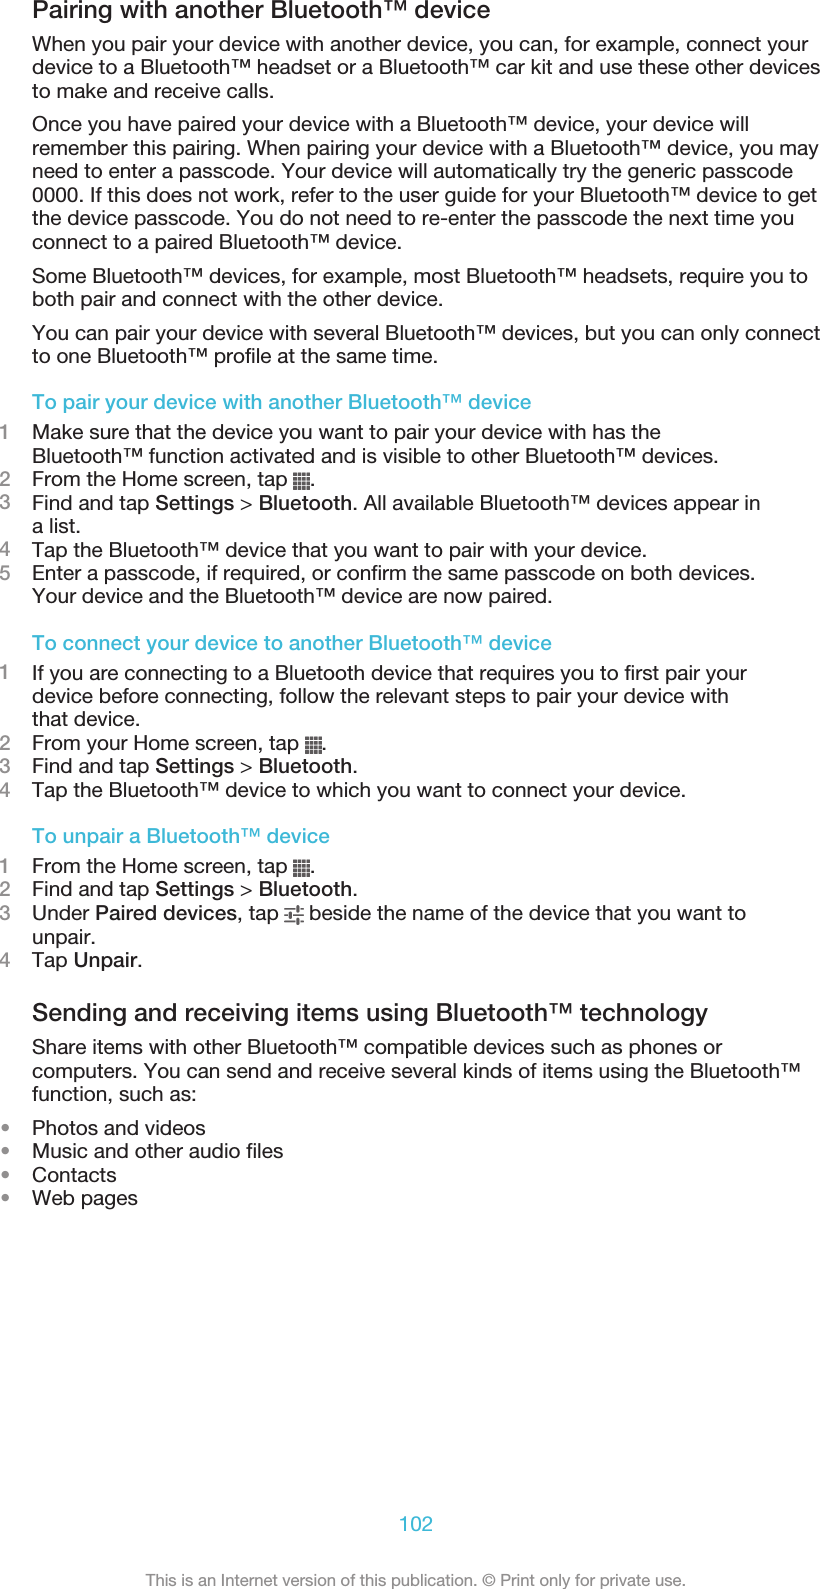 Pairing with another Bluetooth™ deviceWhen you pair your device with another device, you can, for example, connect yourdevice to a Bluetooth™ headset or a Bluetooth™ car kit and use these other devicesto make and receive calls.Once you have paired your device with a Bluetooth™ device, your device willremember this pairing. When pairing your device with a Bluetooth™ device, you mayneed to enter a passcode. Your device will automatically try the generic passcode0000. If this does not work, refer to the user guide for your Bluetooth™ device to getthe device passcode. You do not need to re-enter the passcode the next time youconnect to a paired Bluetooth™ device.Some Bluetooth™ devices, for example, most Bluetooth™ headsets, require you toboth pair and connect with the other device.You can pair your device with several Bluetooth™ devices, but you can only connectto one Bluetooth™ profile at the same time.To pair your device with another Bluetooth™ device1Make sure that the device you want to pair your device with has theBluetooth™ function activated and is visible to other Bluetooth™ devices.2From the Home screen, tap  .3Find and tap Settings &gt; Bluetooth. All available Bluetooth™ devices appear ina list.4Tap the Bluetooth™ device that you want to pair with your device.5Enter a passcode, if required, or confirm the same passcode on both devices.Your device and the Bluetooth™ device are now paired.To connect your device to another Bluetooth™ device1If you are connecting to a Bluetooth device that requires you to first pair yourdevice before connecting, follow the relevant steps to pair your device withthat device.2From your Home screen, tap  .3Find and tap Settings &gt; Bluetooth.4Tap the Bluetooth™ device to which you want to connect your device.To unpair a Bluetooth™ device1From the Home screen, tap  .2Find and tap Settings &gt; Bluetooth.3Under Paired devices, tap   beside the name of the device that you want tounpair.4Tap Unpair.Sending and receiving items using Bluetooth™ technologyShare items with other Bluetooth™ compatible devices such as phones orcomputers. You can send and receive several kinds of items using the Bluetooth™function, such as:•Photos and videos•Music and other audio files•Contacts•Web pages102This is an Internet version of this publication. © Print only for private use.